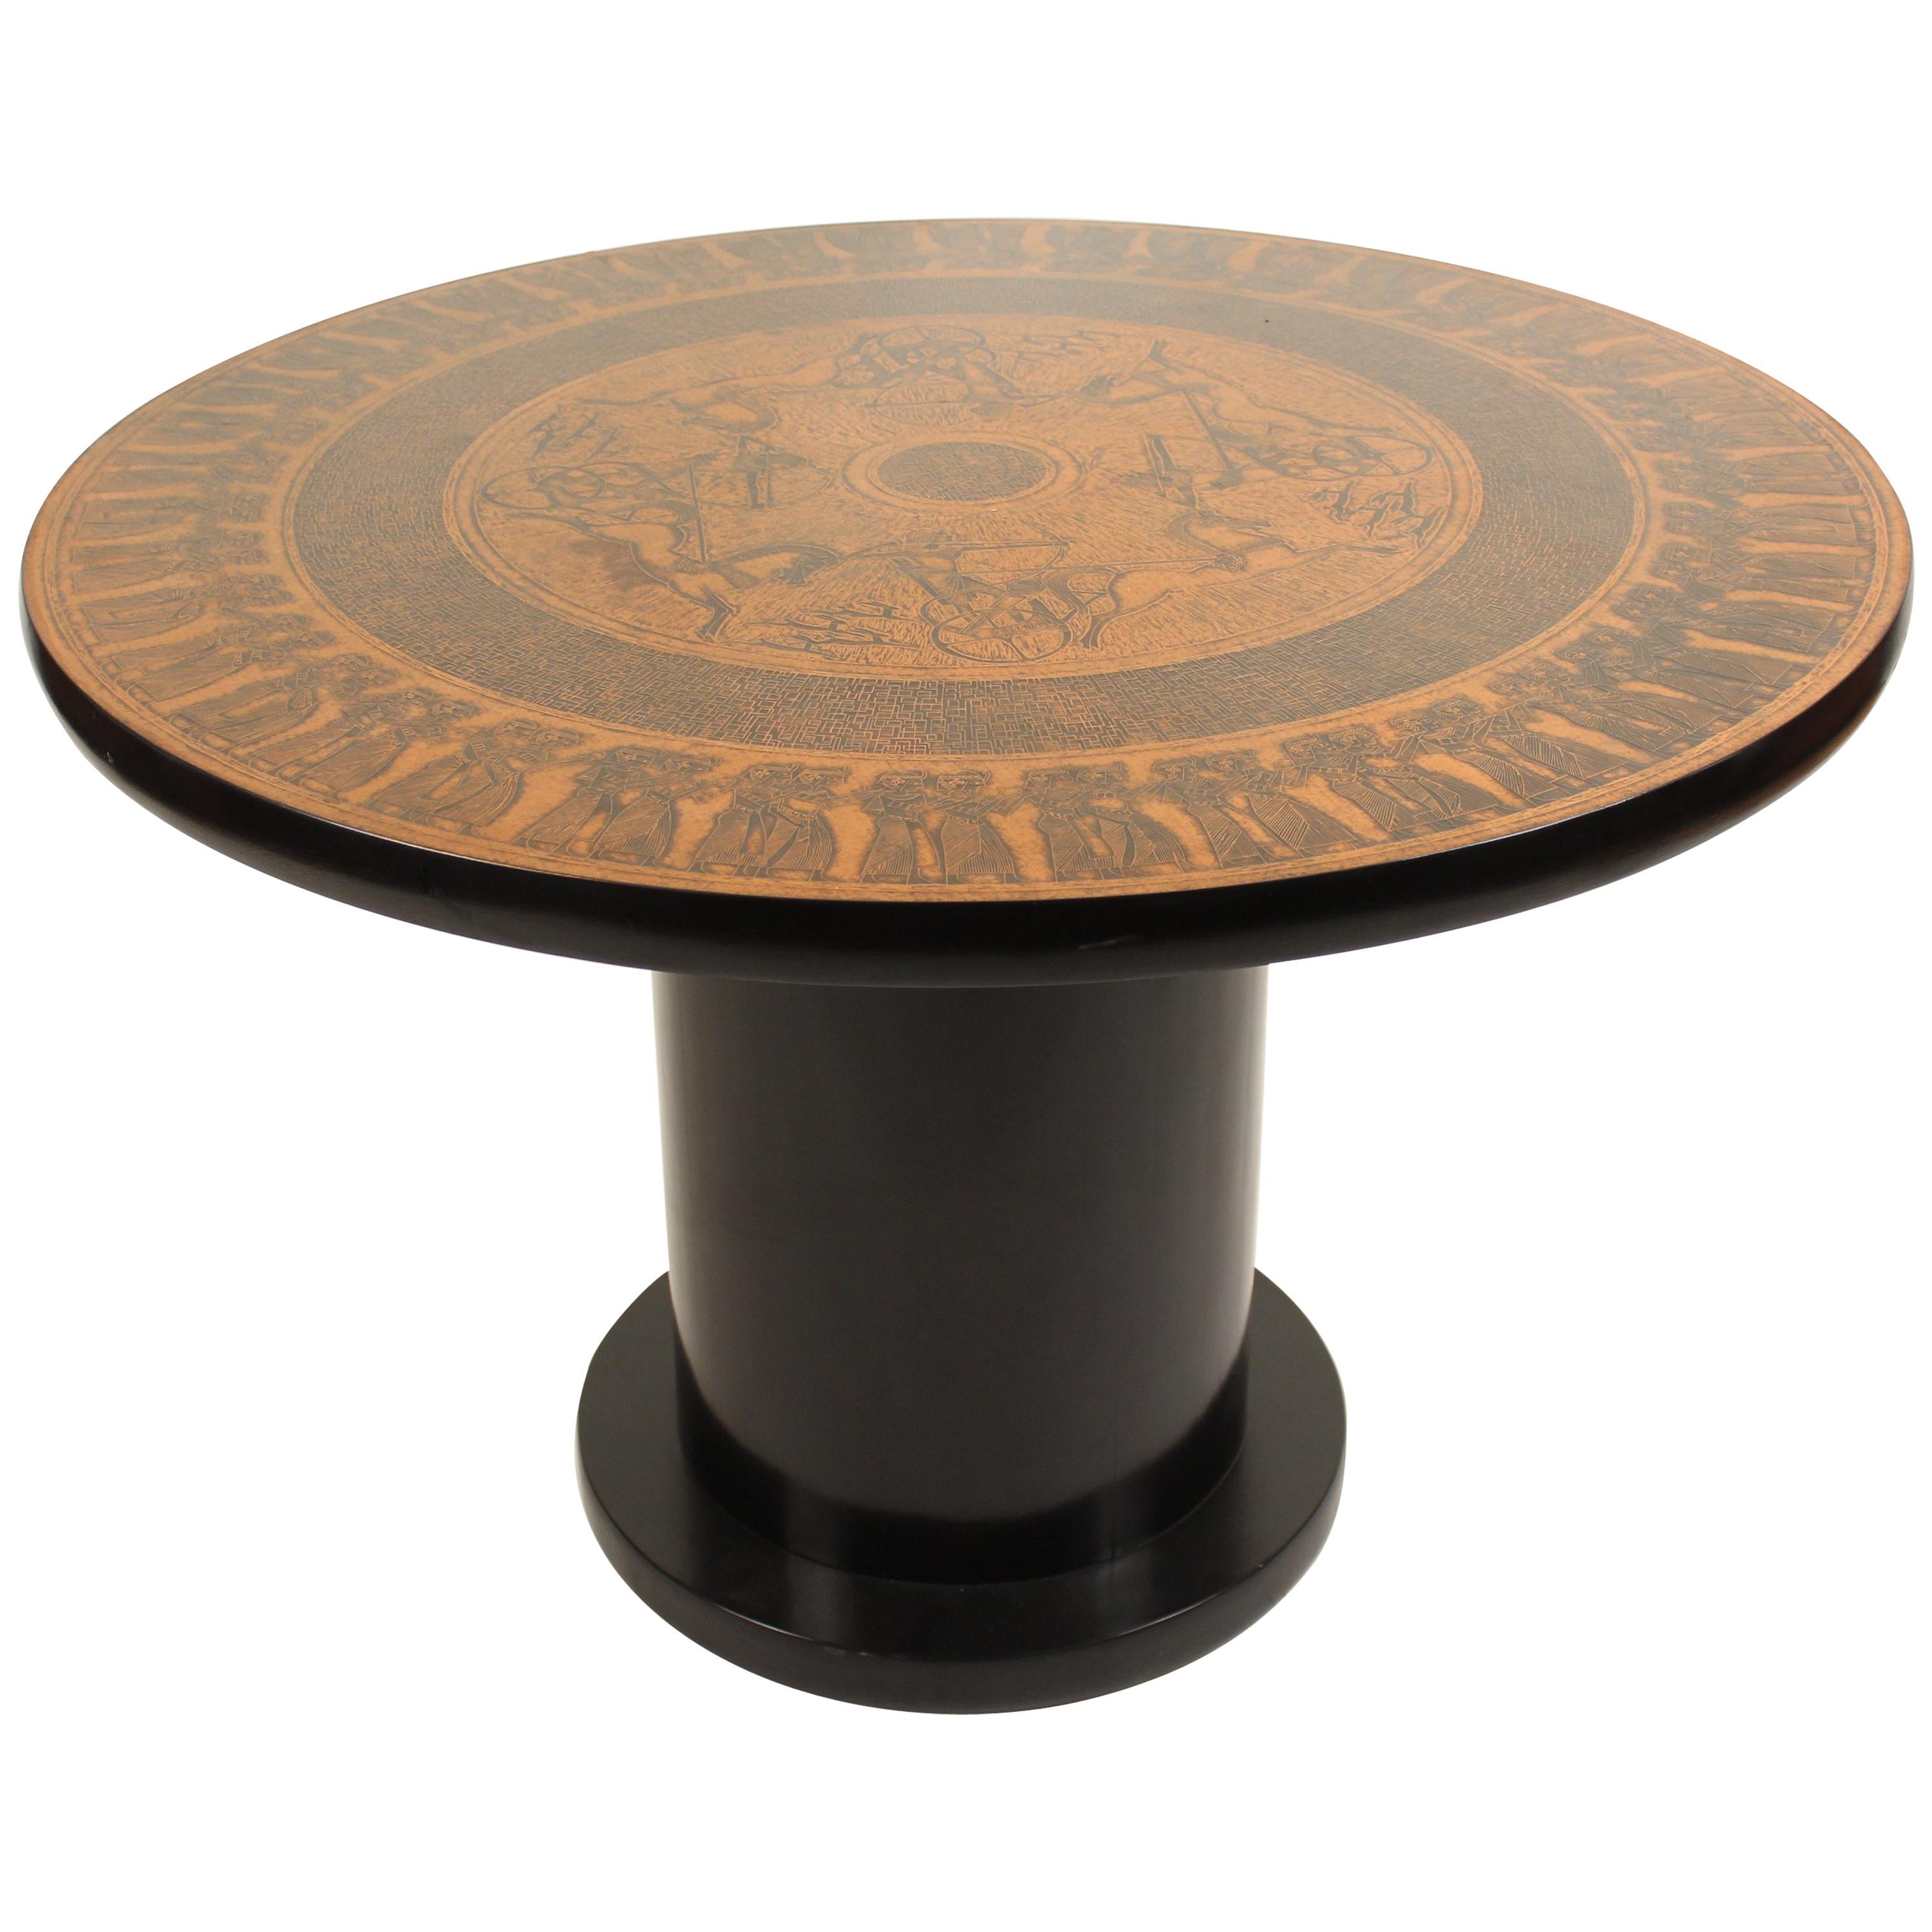 Center Table with Egyptian Design Engraved  faux Copper Top